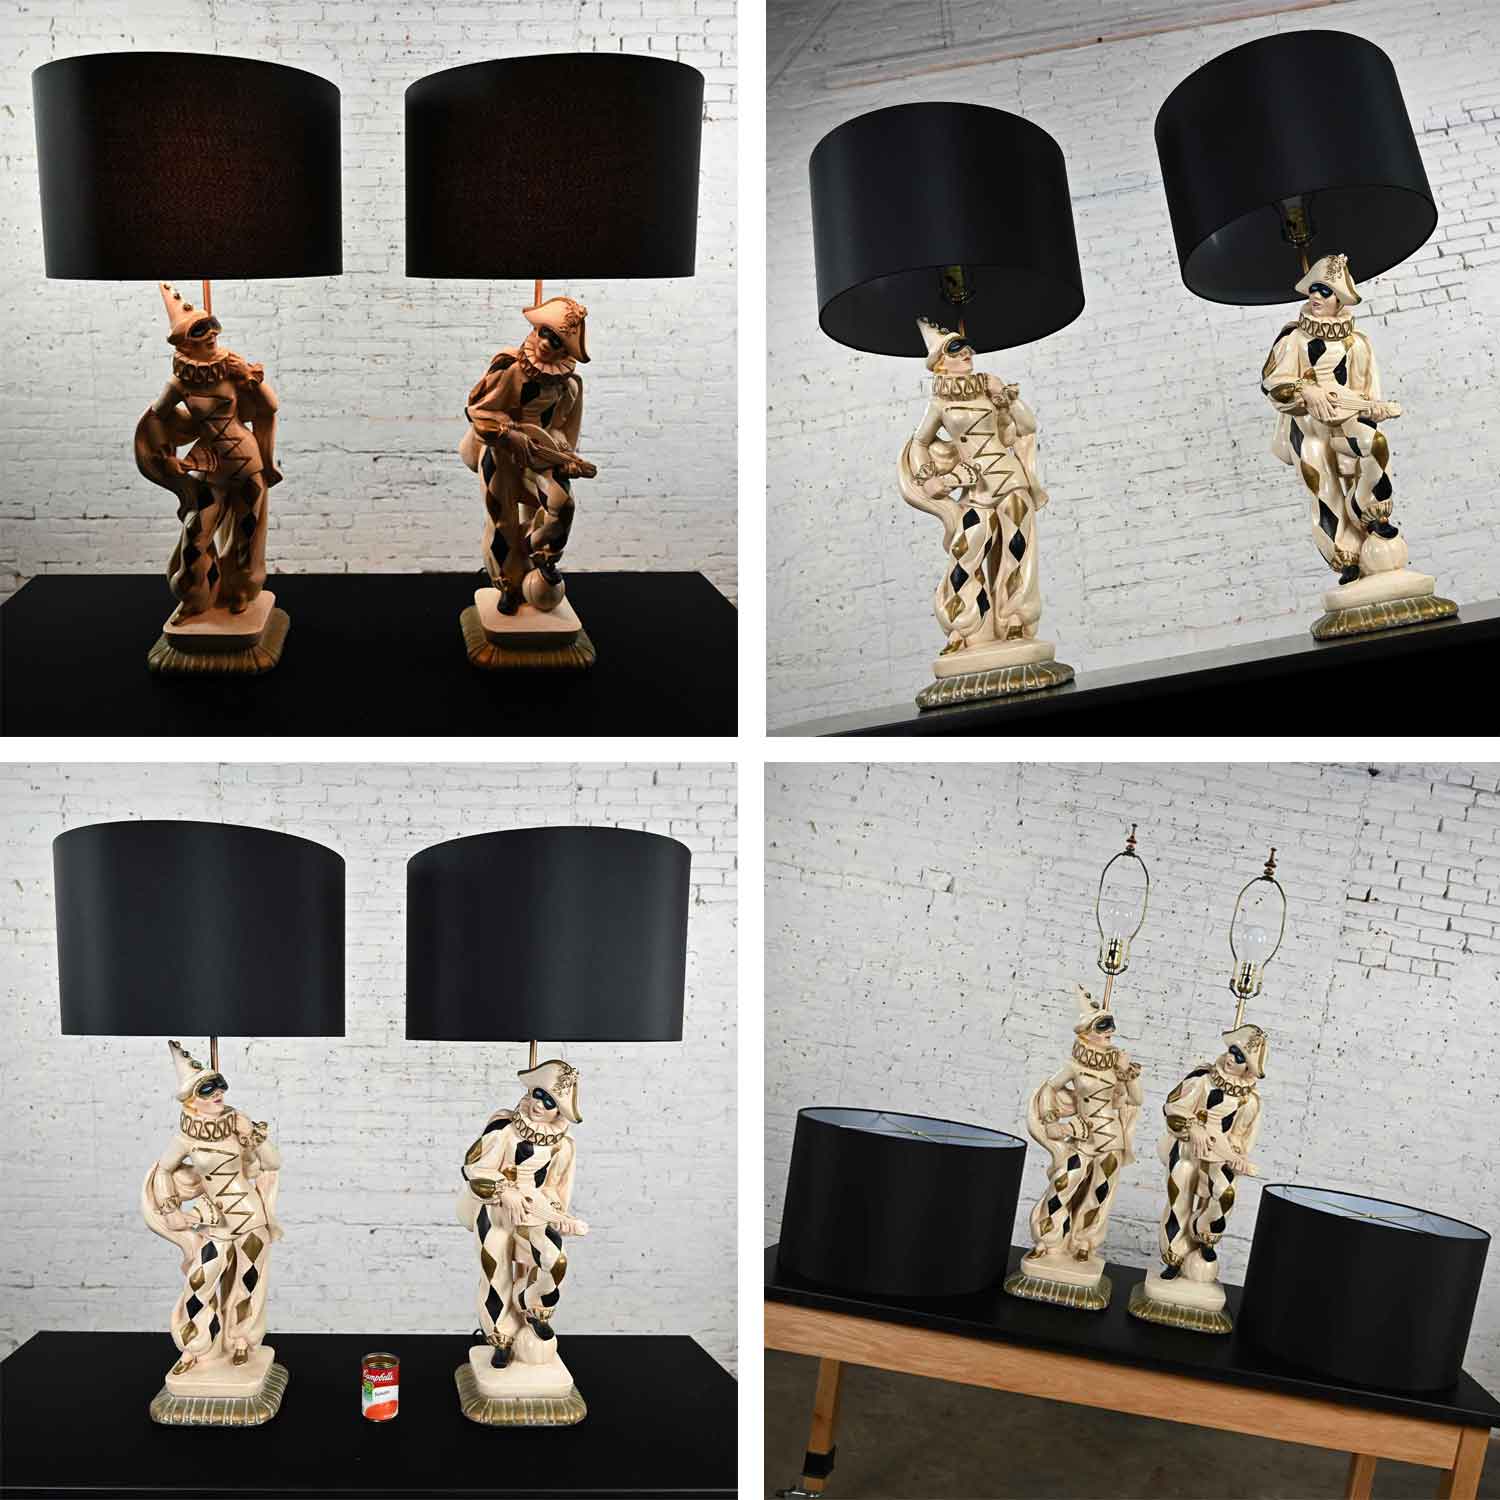 Vintage MCM Art Deco Figural Jester Harlequin Table Lamps Style of Marbro a Pair